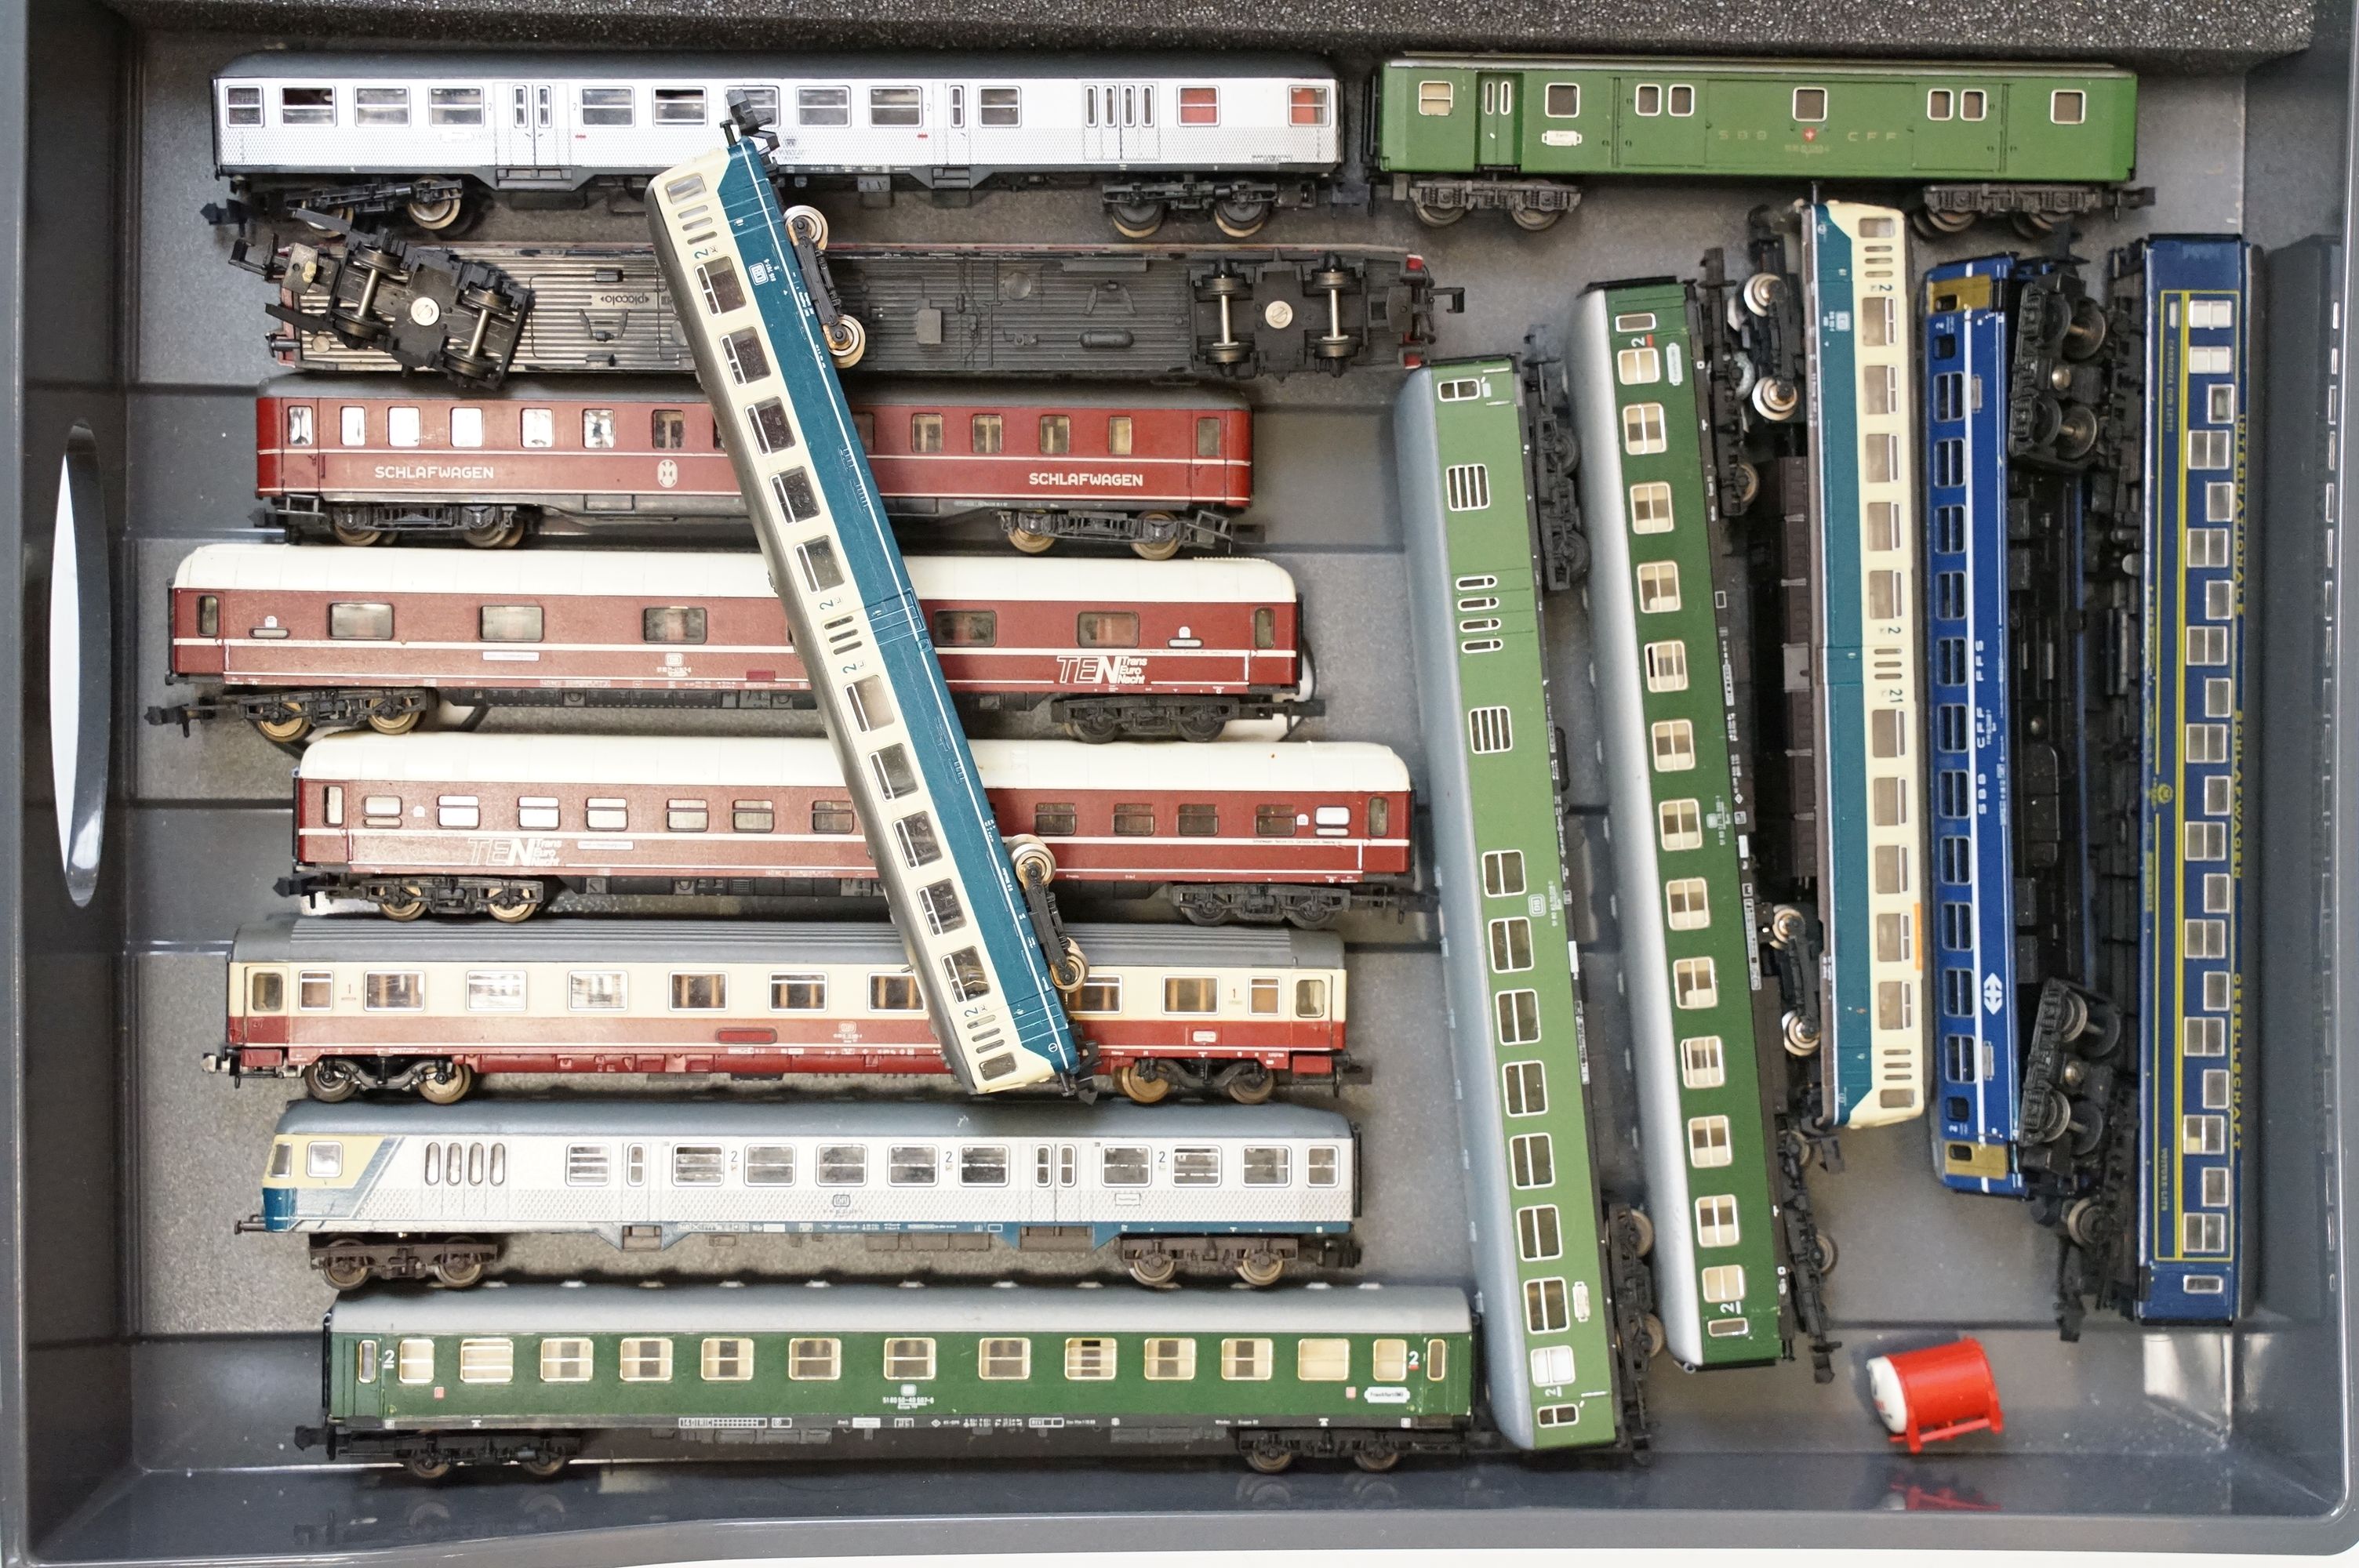 Over 80 N gauge items of rolling stock to include coaches, vans and wagons featuring Minitrix, Roco, - Image 5 of 8